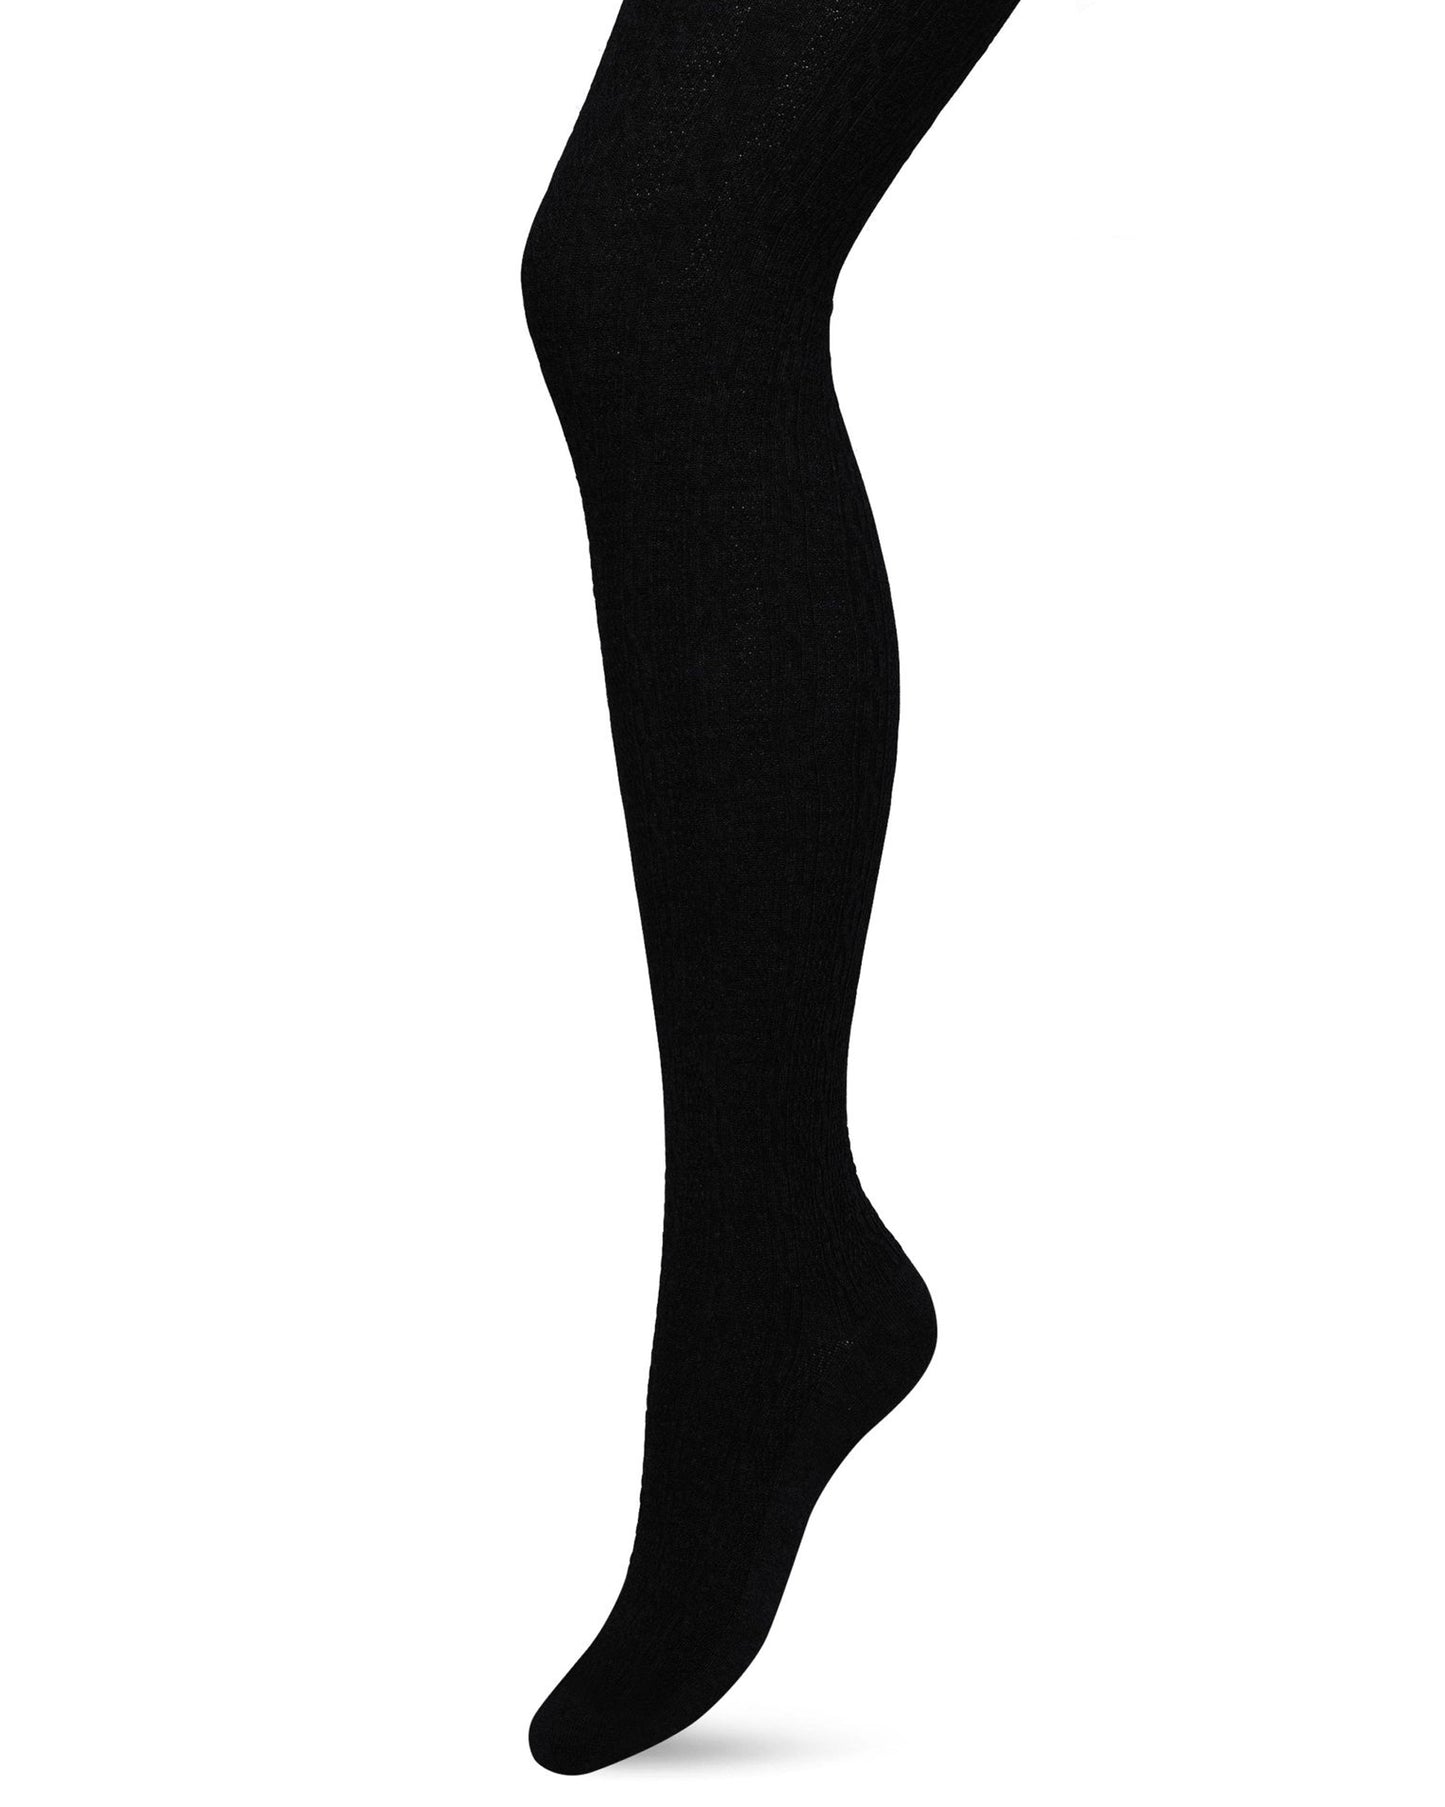 Bonnie Doon Classic Cable Tights - Black organic cotton knitted tights with a cable knit style ribbed pattern, flat seams, gusset, high waist, shaped heel and flat toe seam.